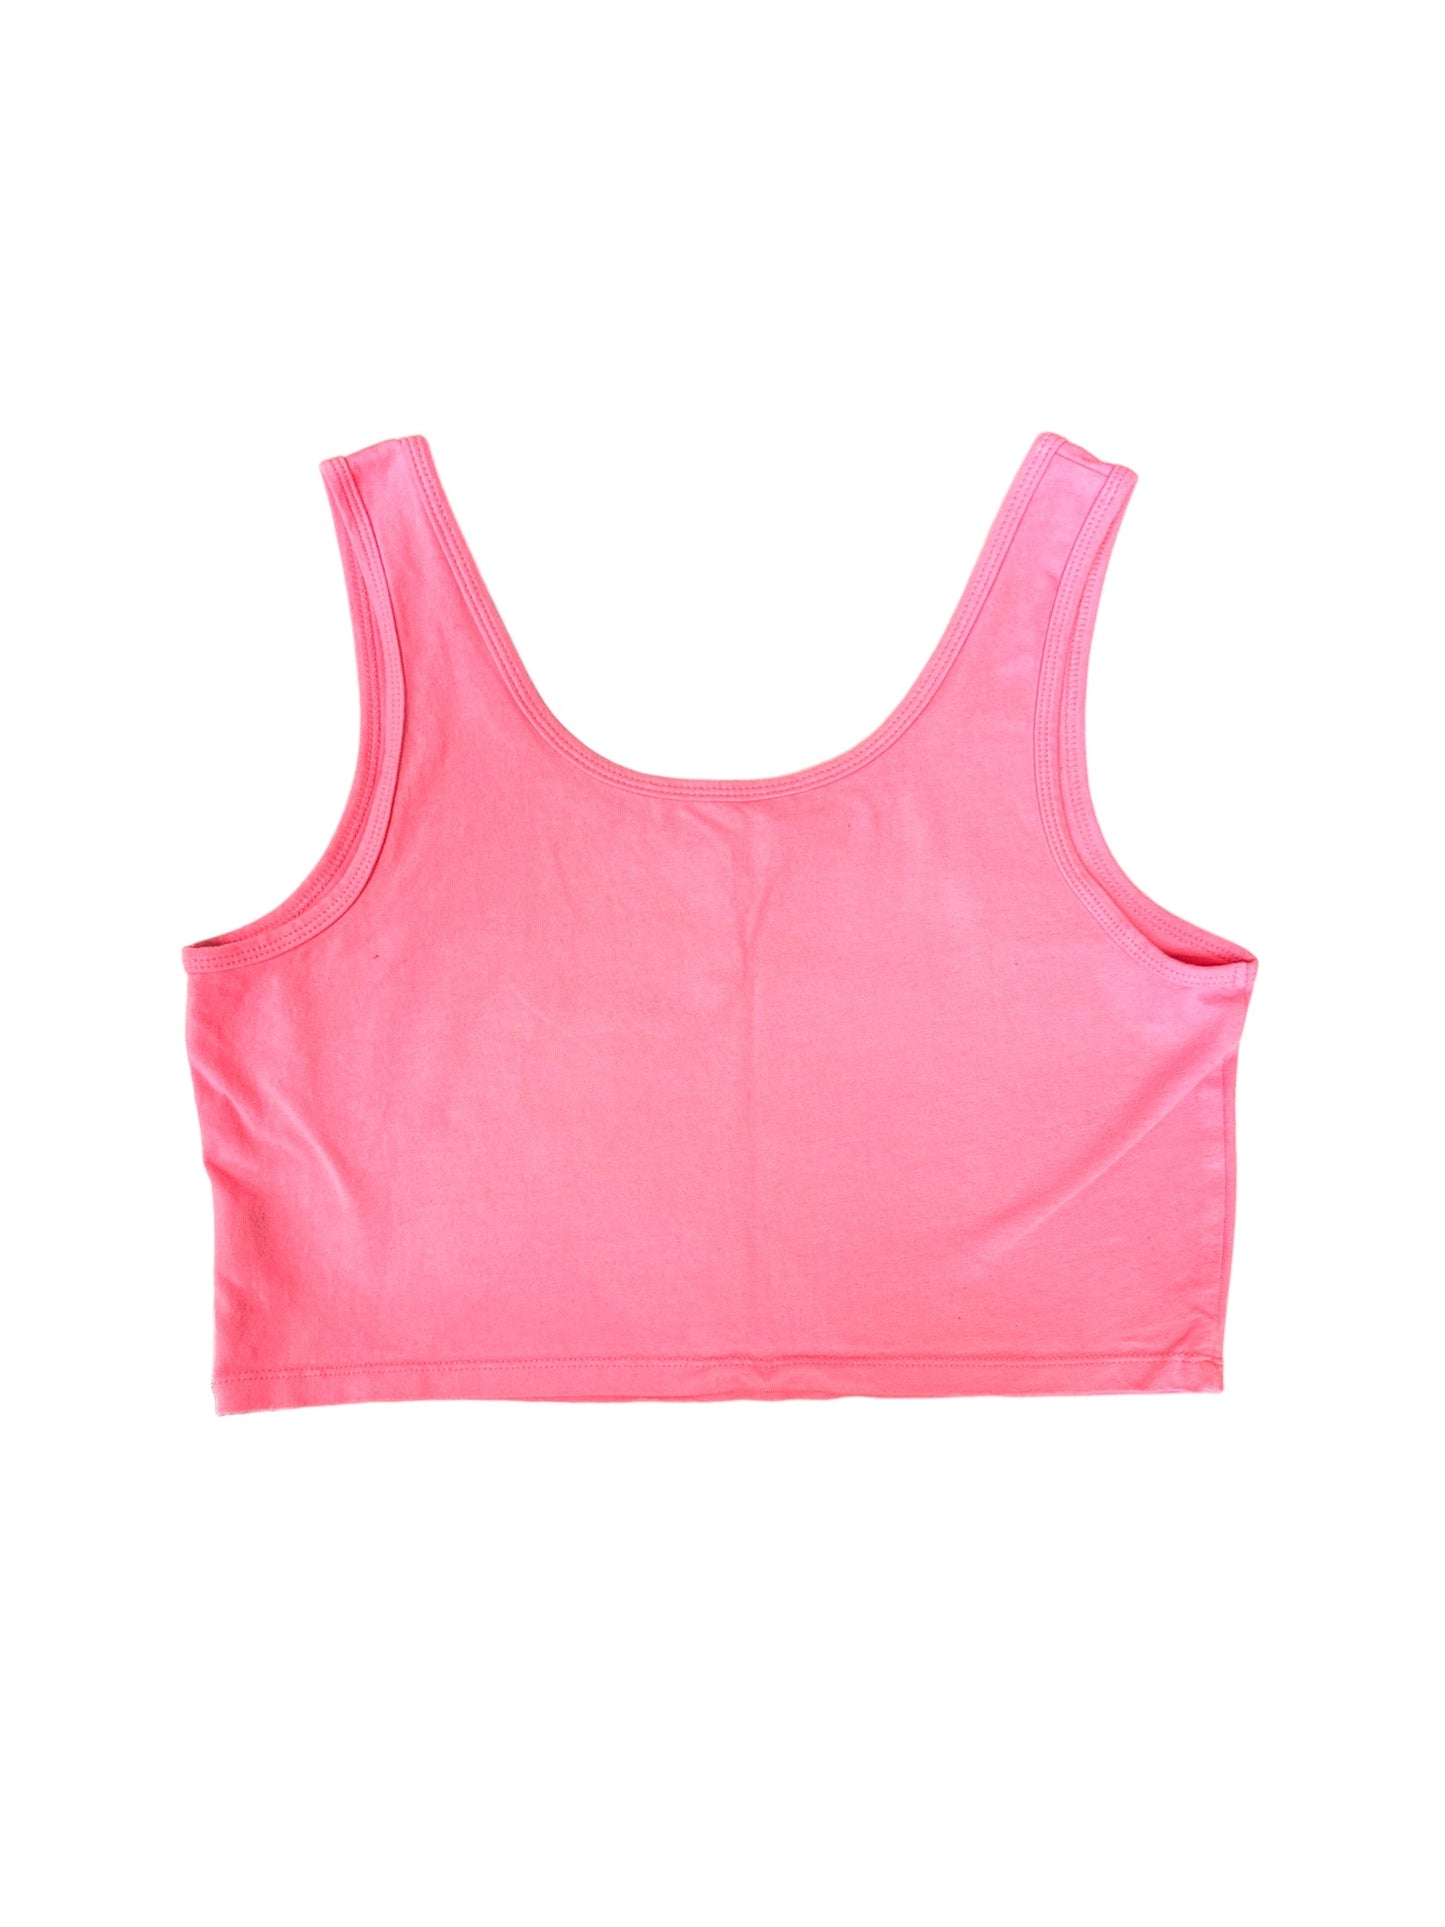 Pink Tank Top Wild Fable, Size 2x